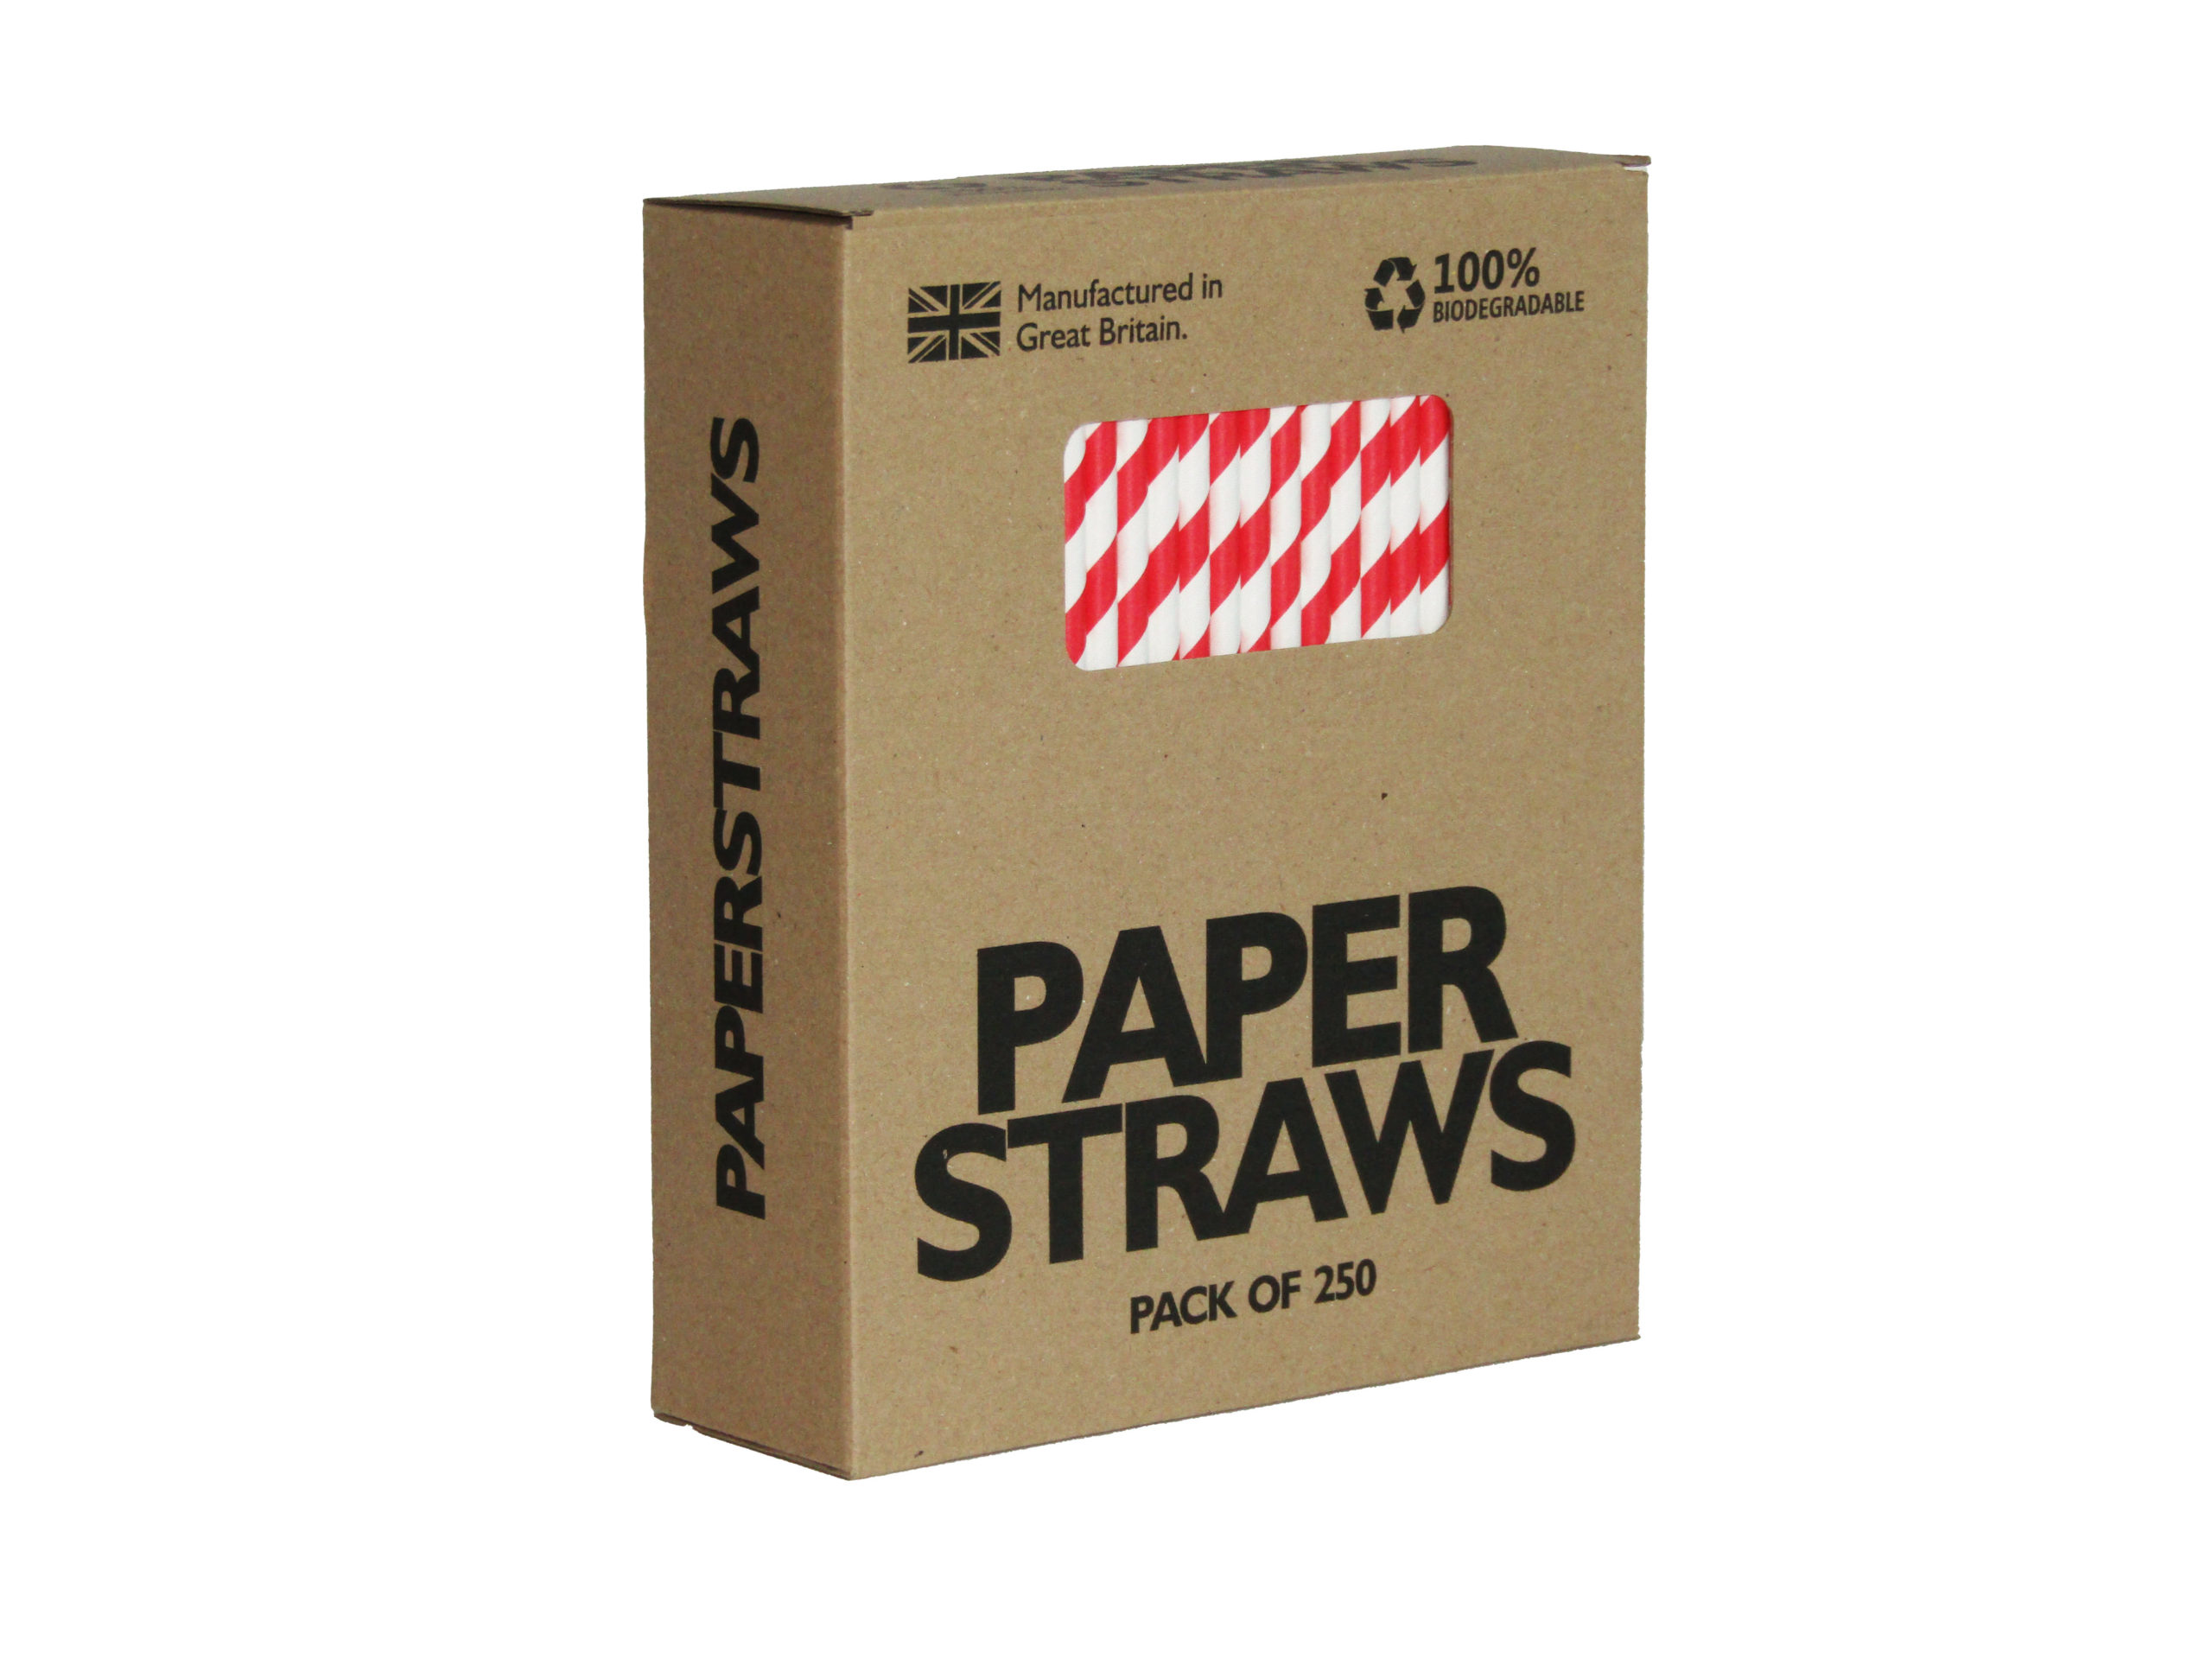 Colorful thin red paper straws 50pcs - Tapegarden